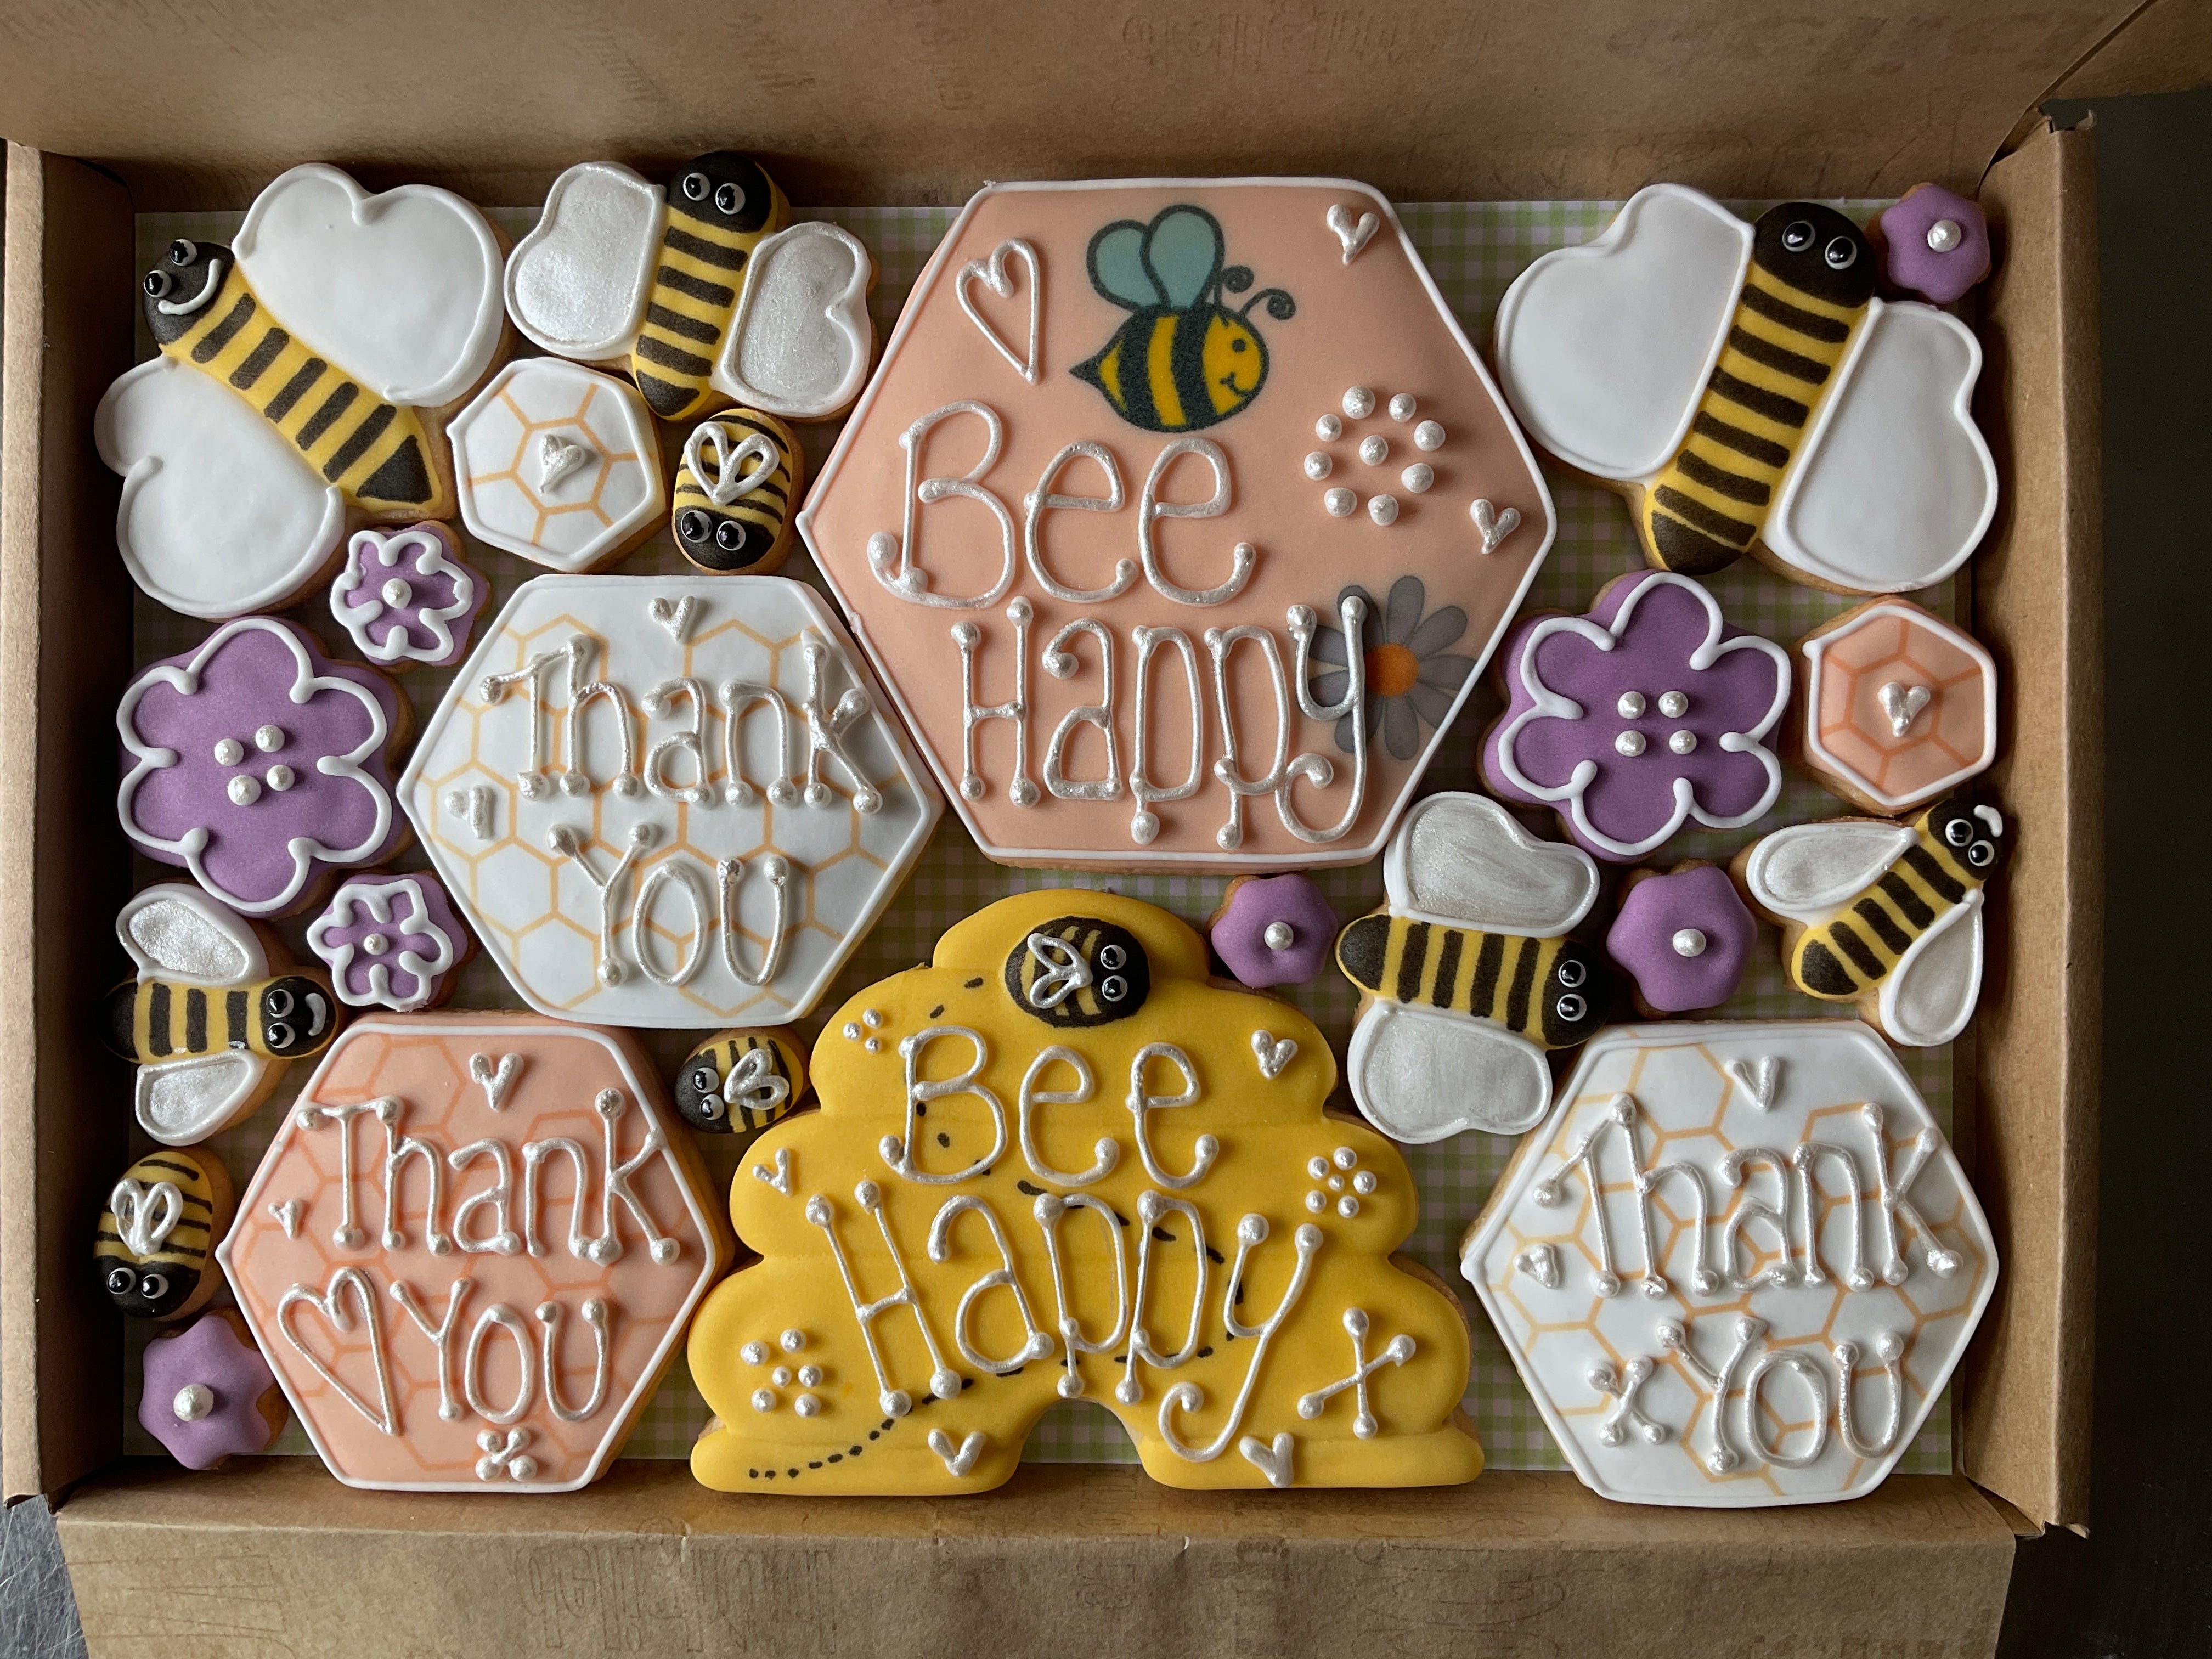 Bees - thank You - Bee Happy  large cookie box